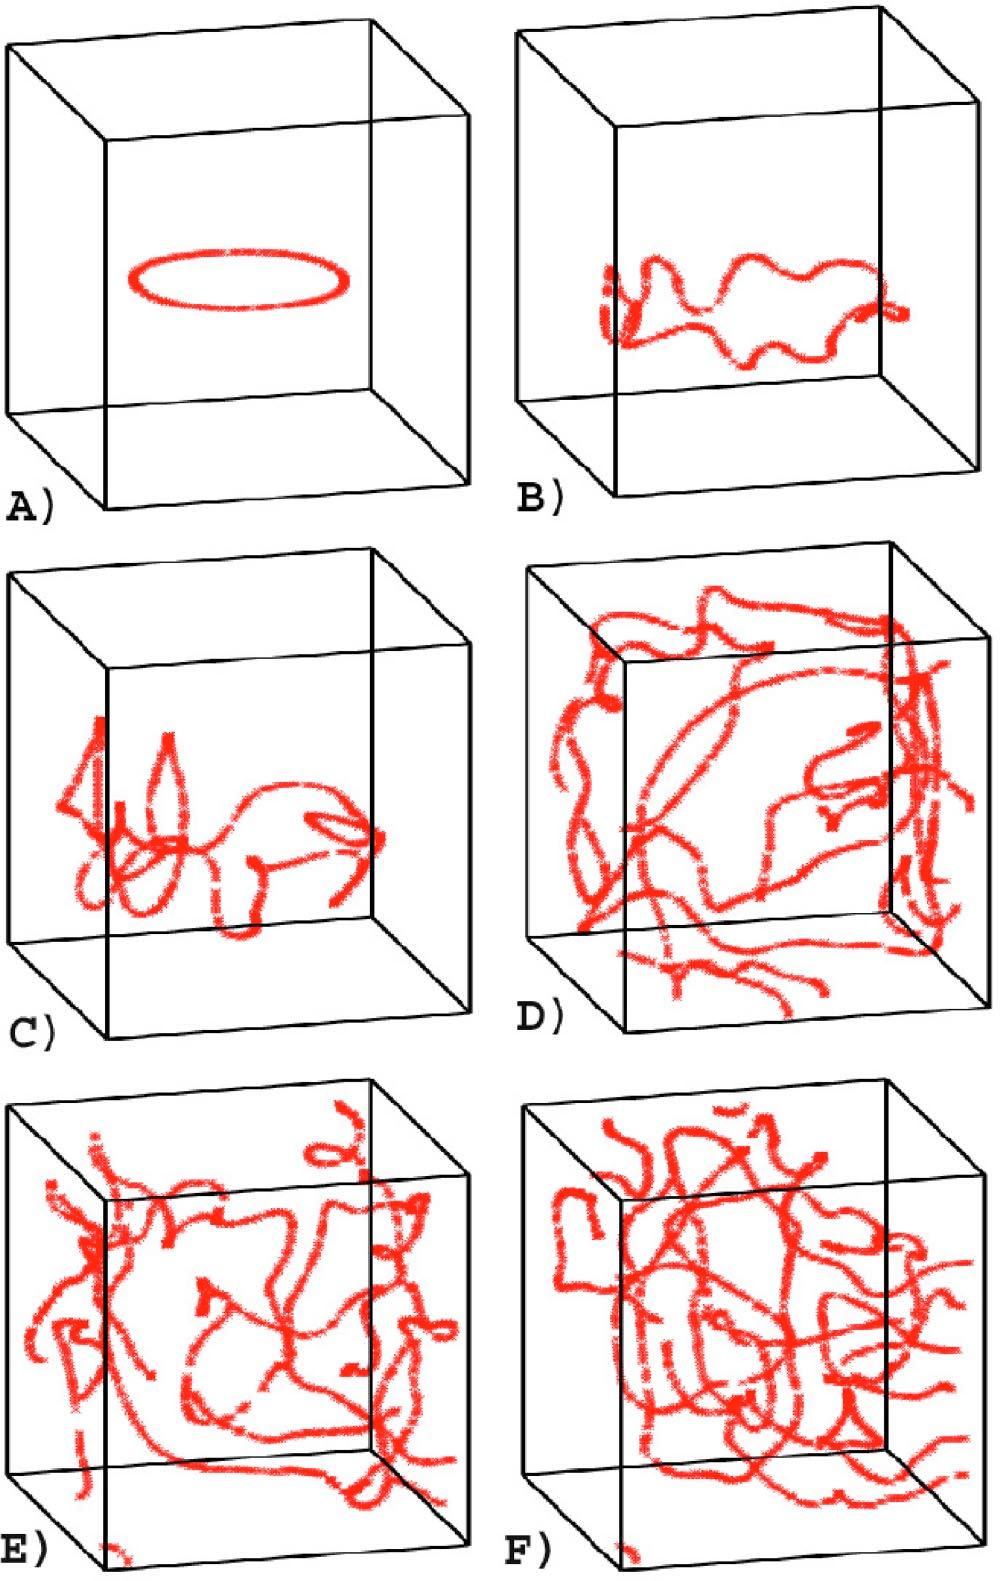 EXPANDING SCROLL RINGS AND NEGATIVE TENSION PHYSICAL REVIEW E 70, 056201 (2004) FIG. 6. Evolution of the filament. The data is taken from the same simulation and at the same time moments as in Fig. 5.